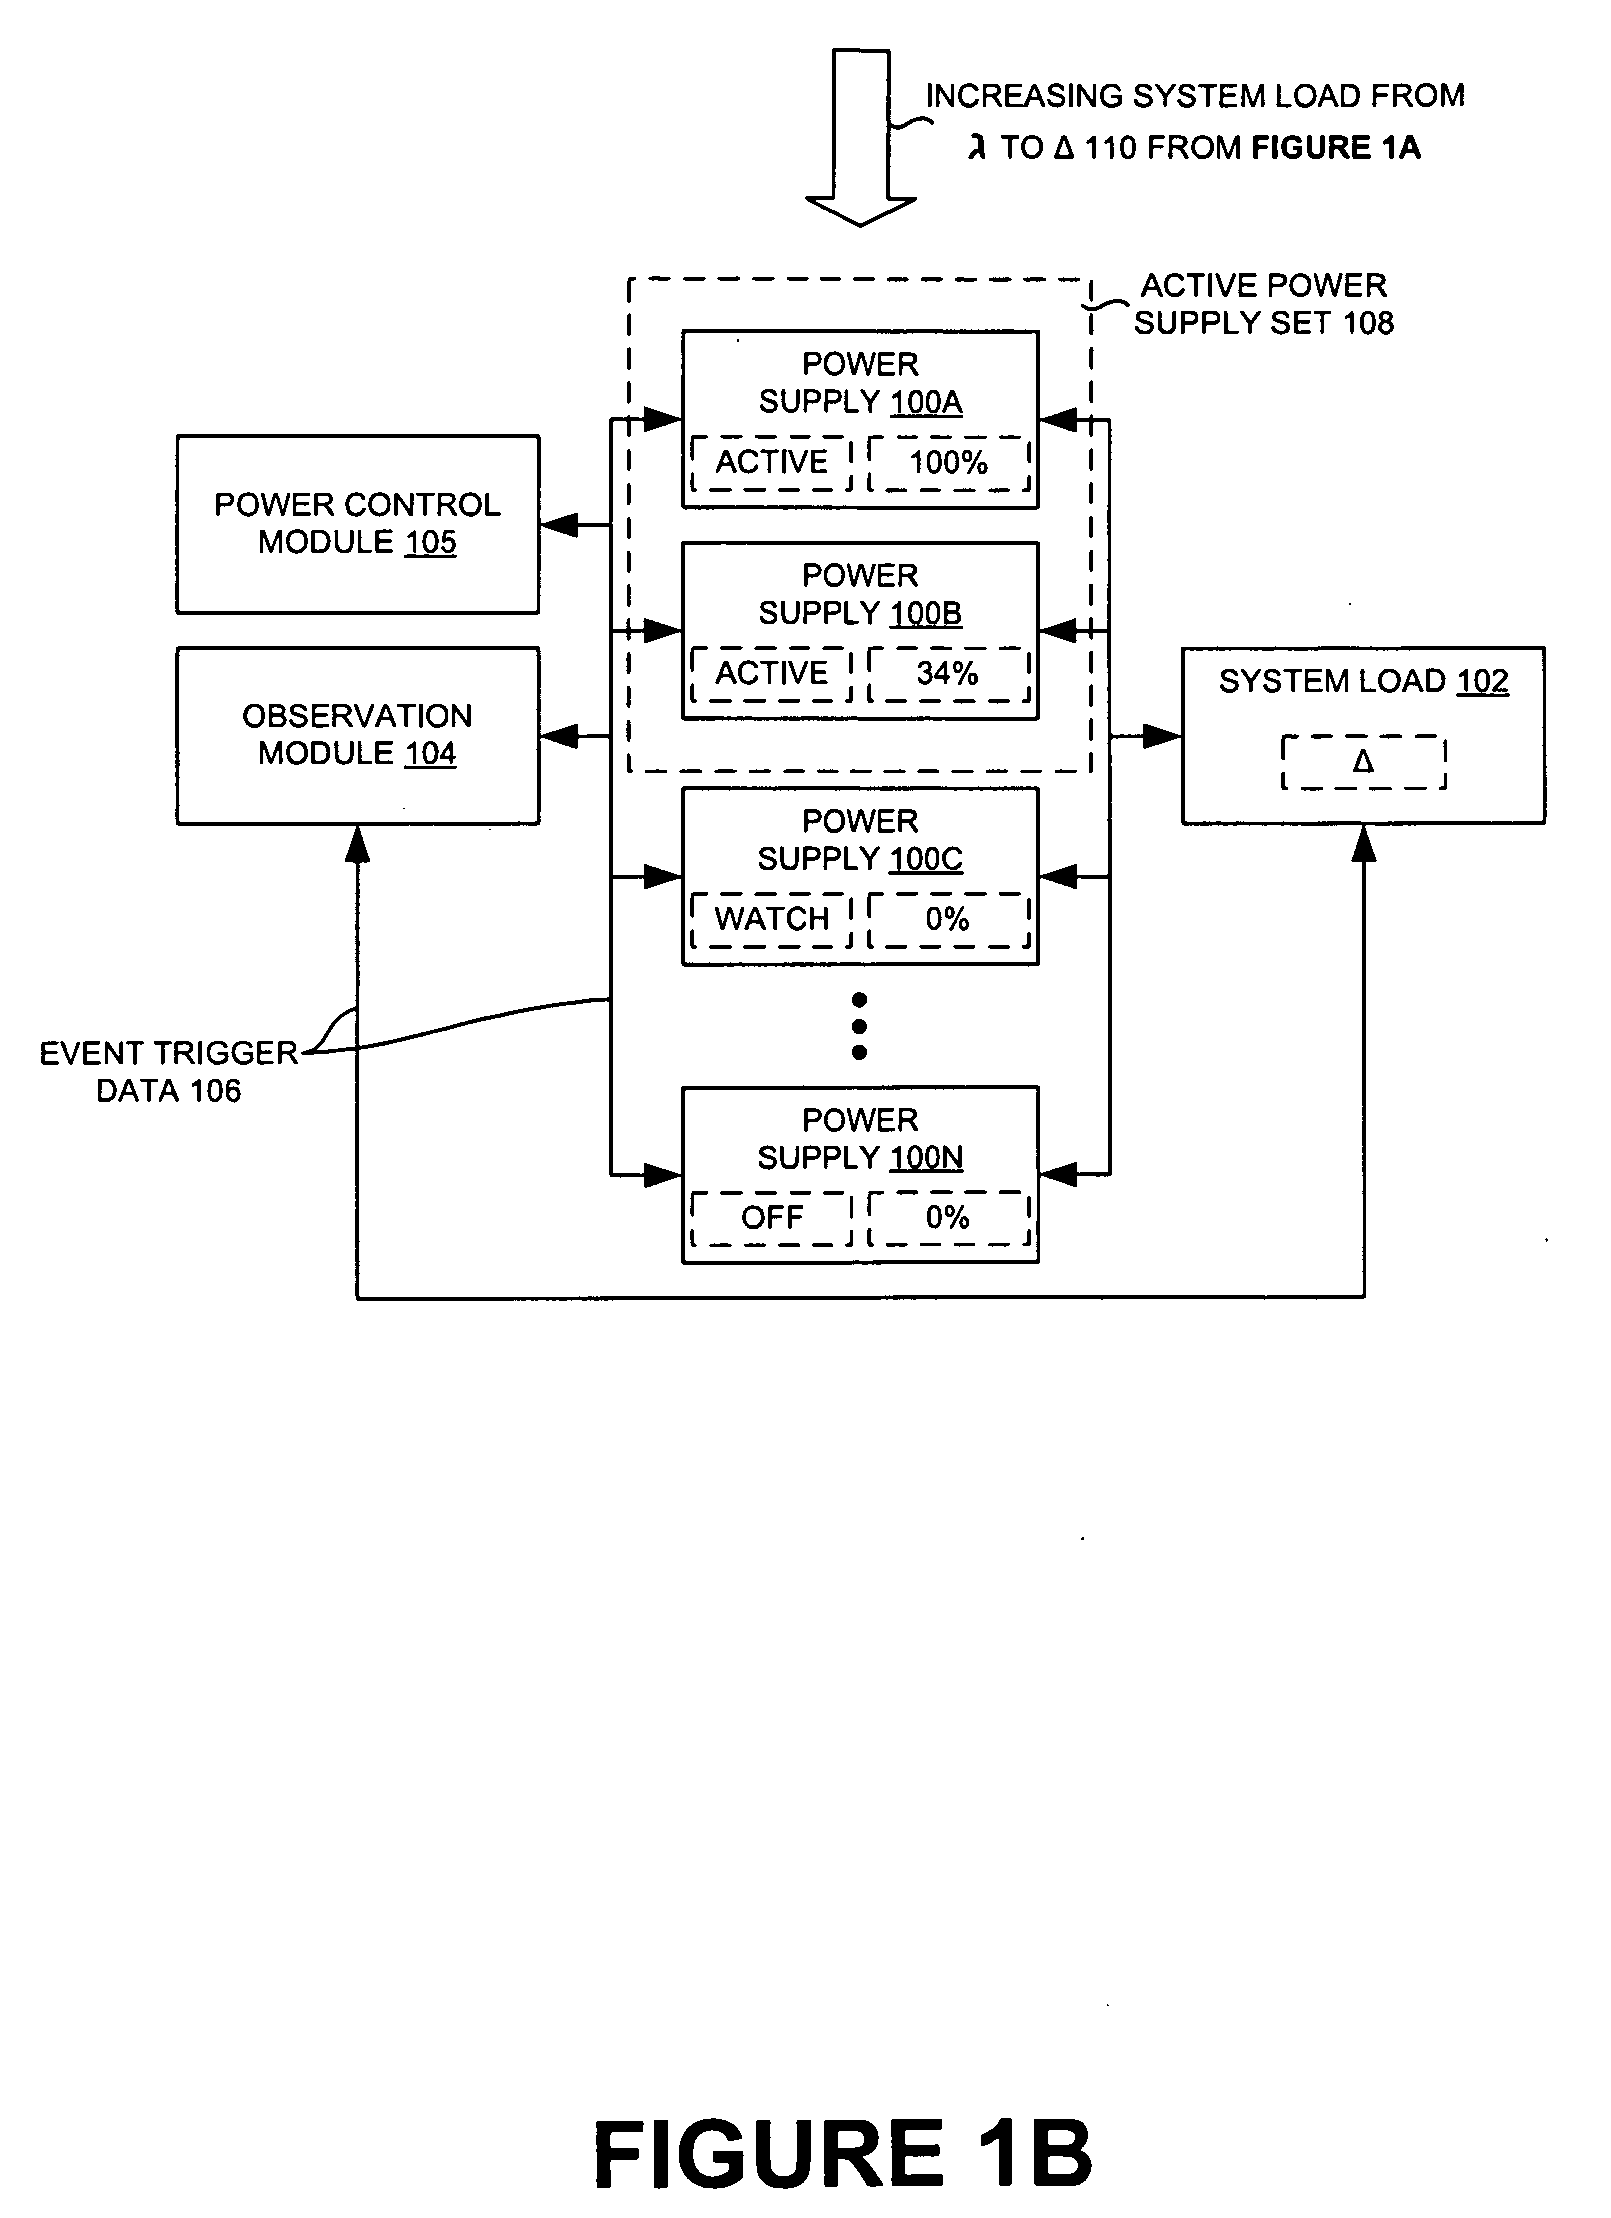 Adaptation of an active power supply set using an event trigger